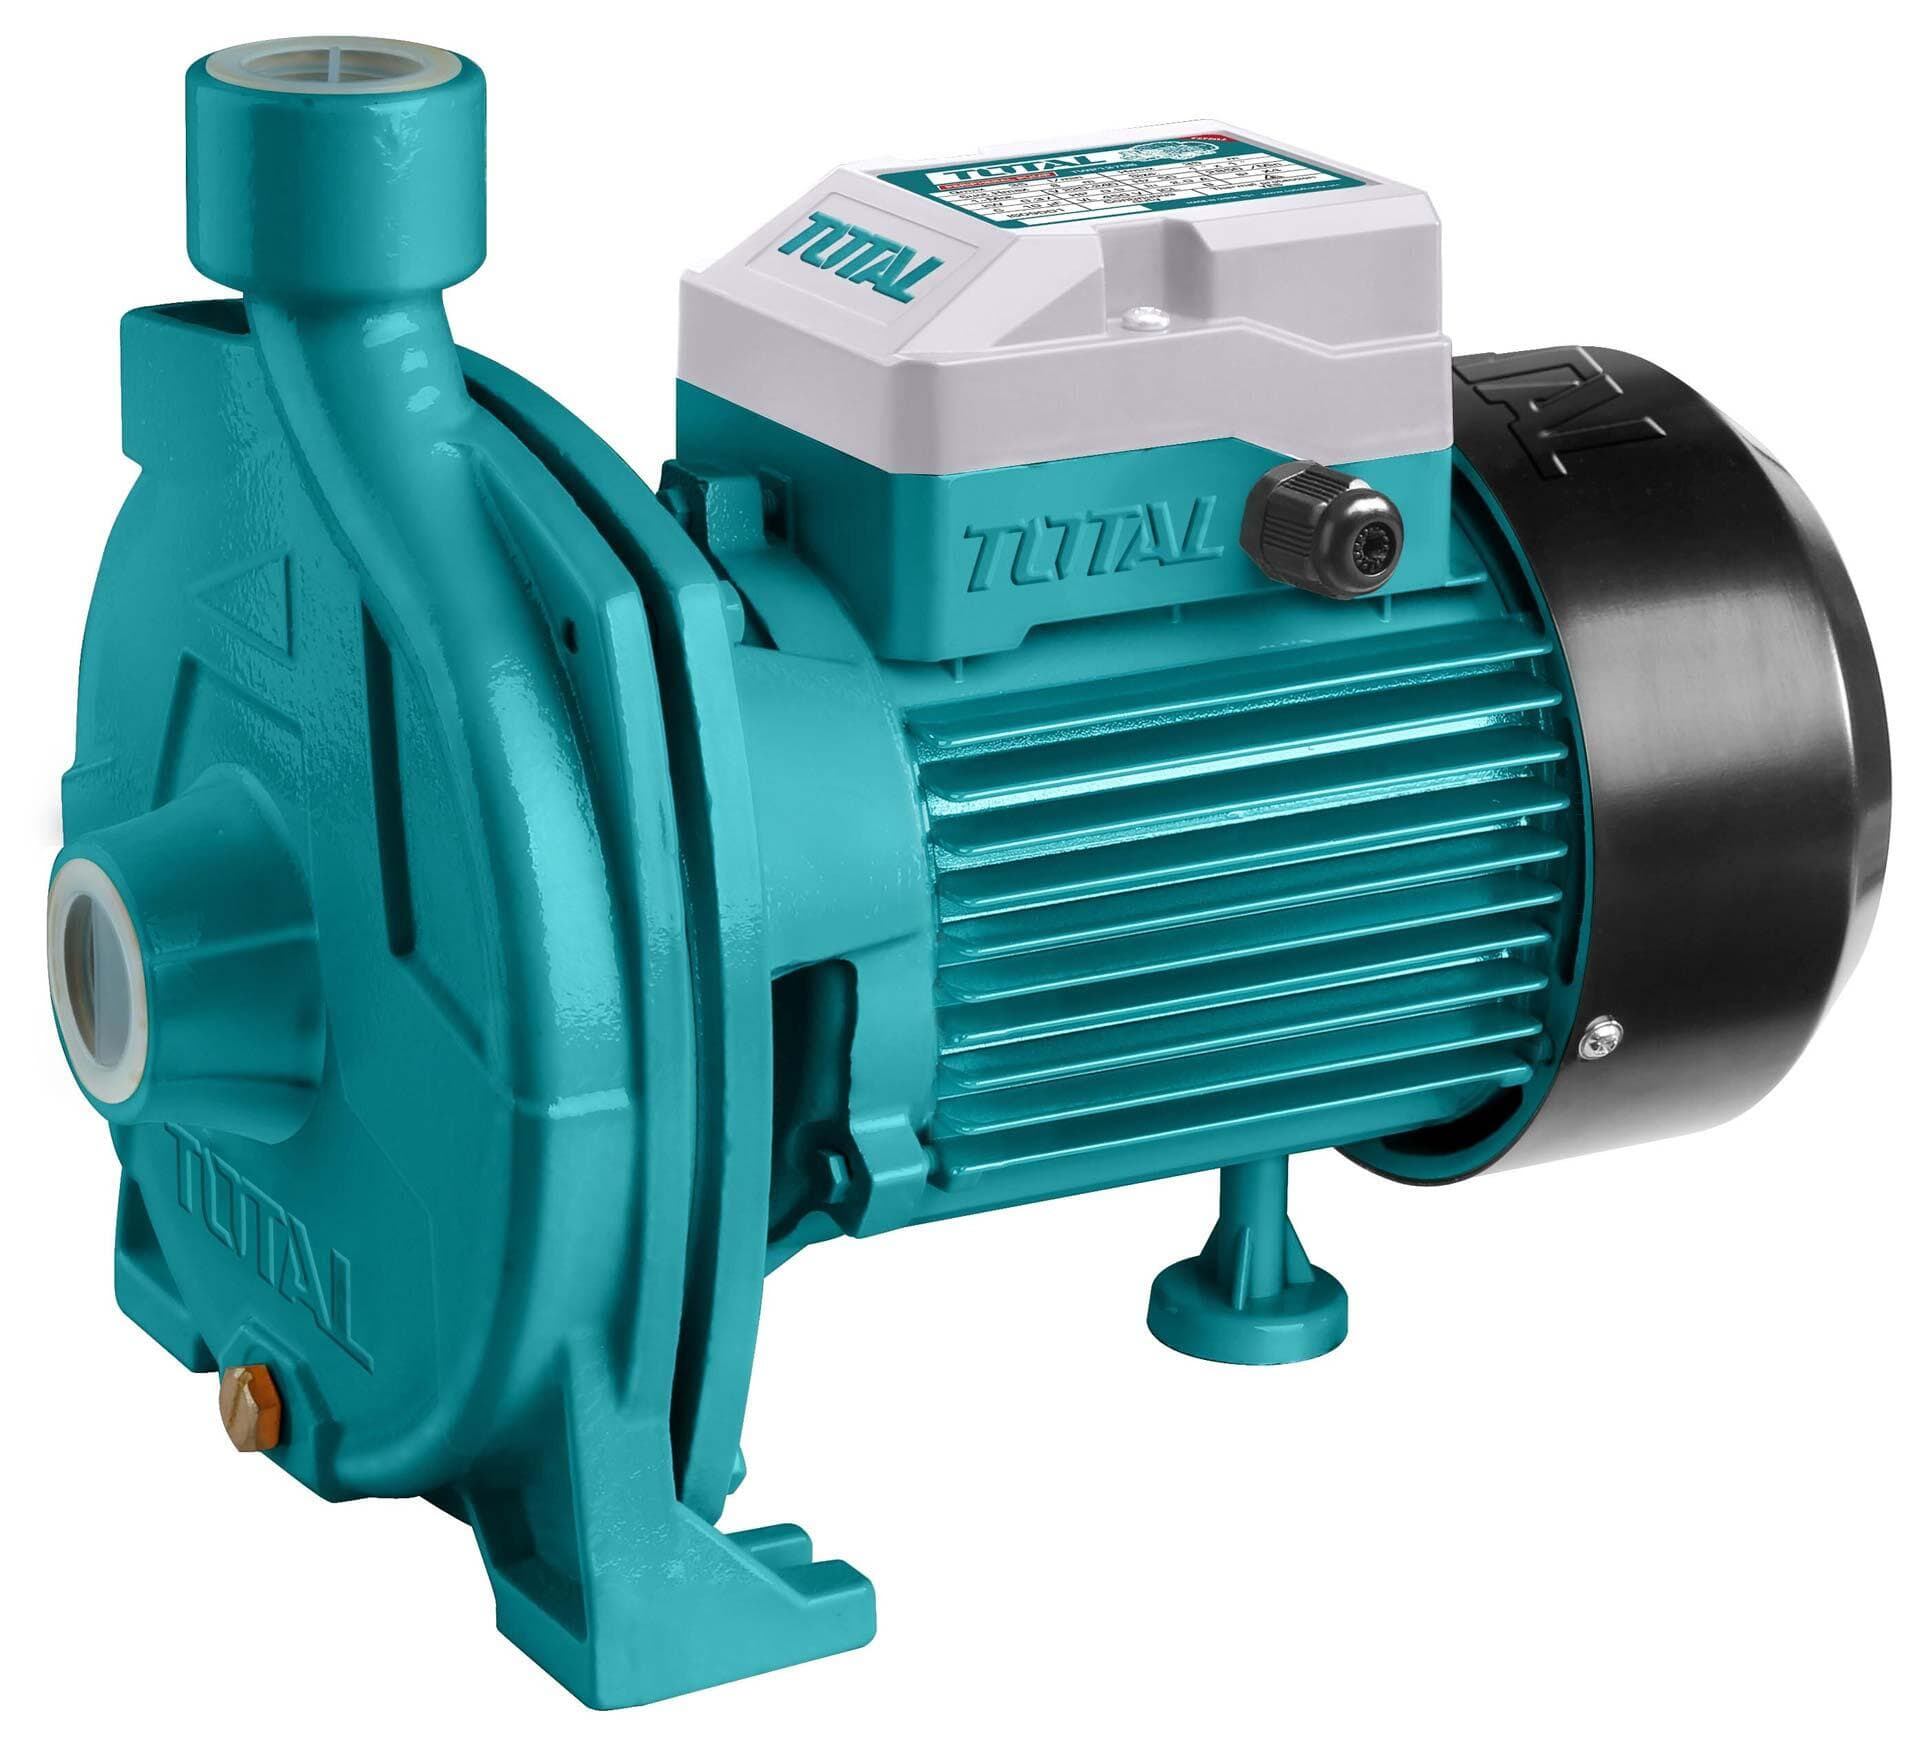 otal Centrifugal Pump 750W 1HP - TWP27506 | Supply Master | Accra, Ghana Centrifugal Pumps Buy Tools hardware Building materials